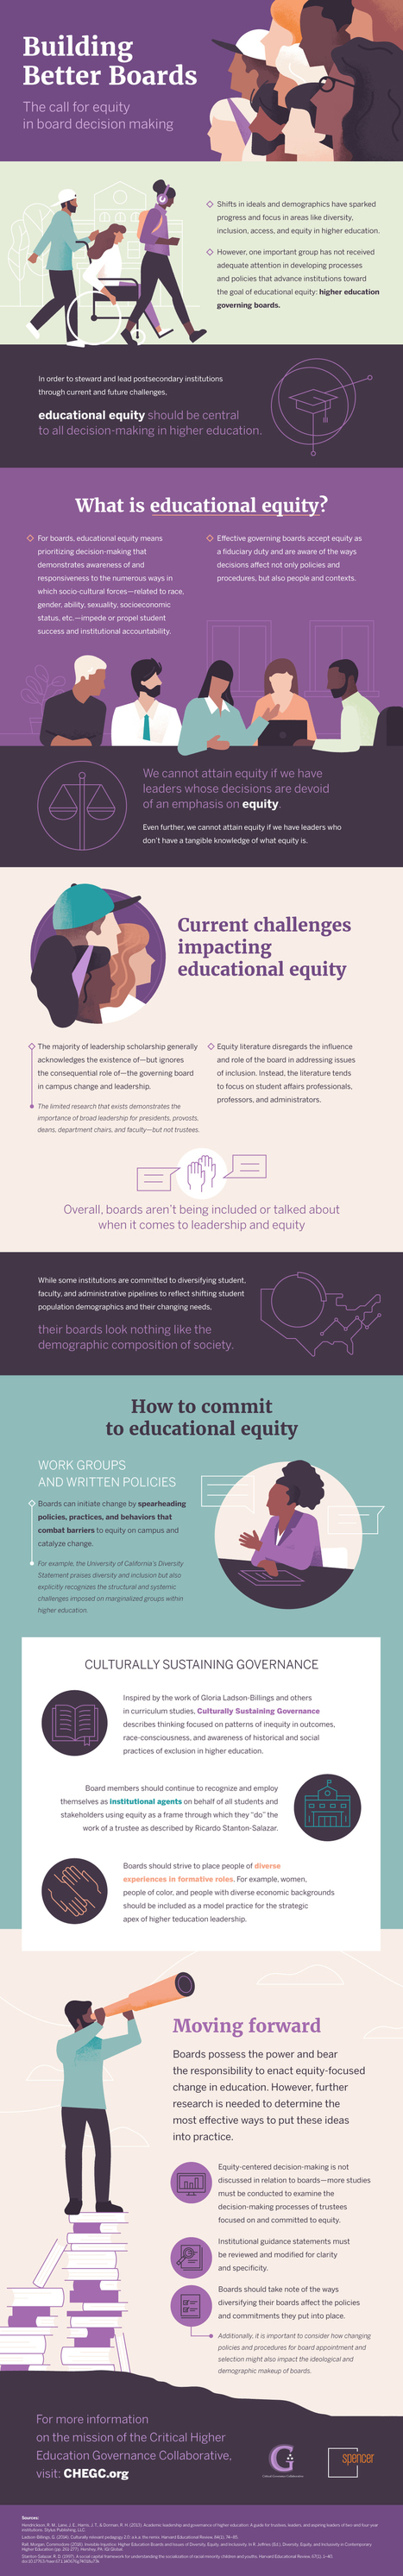 Building Better Boards: The Call for Equity in Board Decision Making - #Infographics | Pedalogica: educación y TIC | Scoop.it